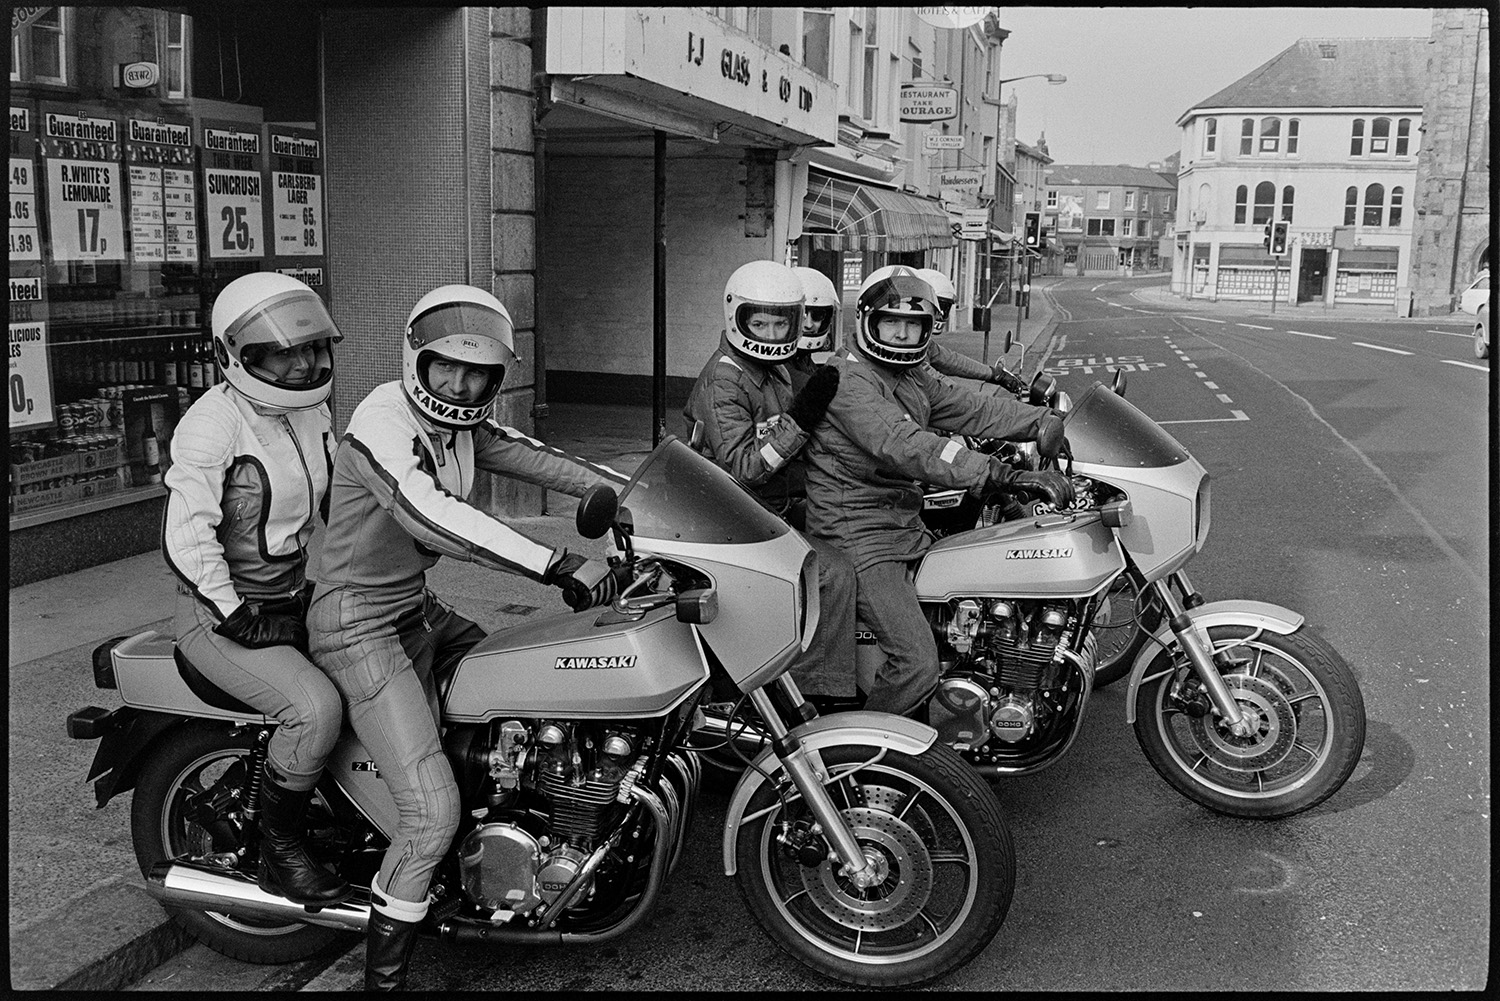 Motorcyclists parked in town. 
[People on motorbikes parked on the side of a road in Okehampton. Shop fronts can be seen in the background.]